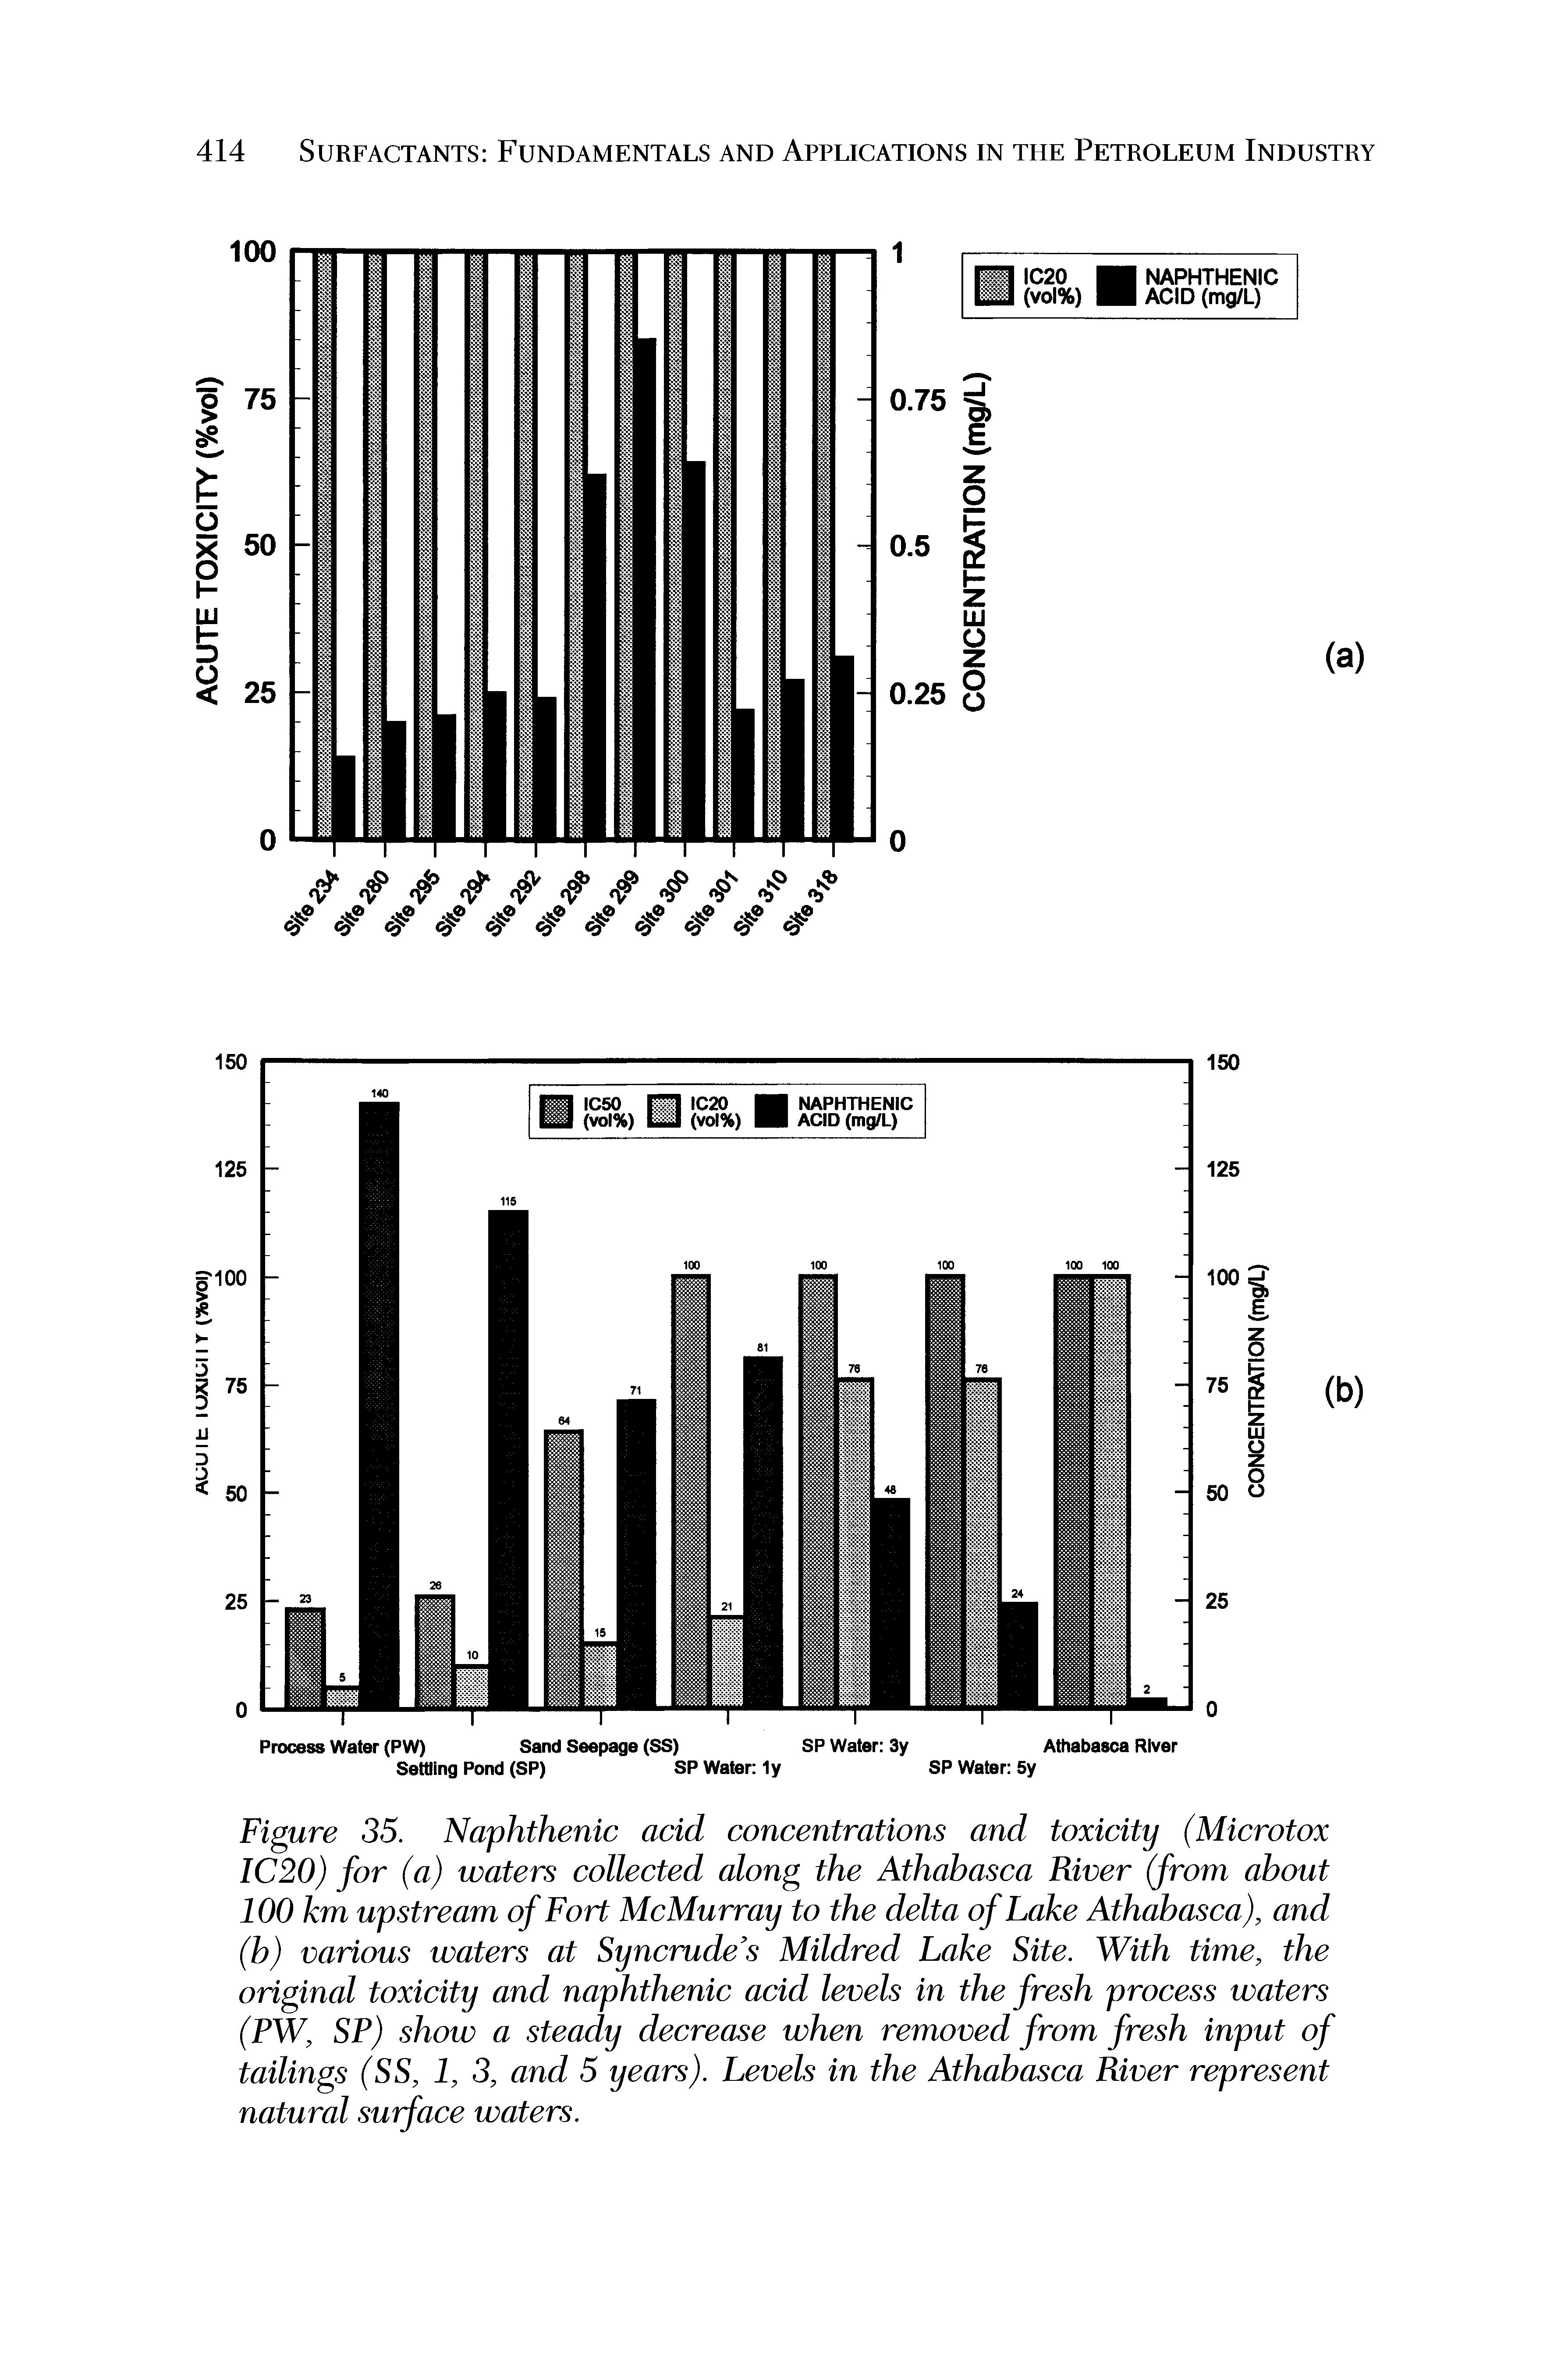 Figure 35. Naphthenic acid concentrations and toxicity (Microtox 1C20) for (a) waters collected along the Athabasca River (from about 100 km upstream of Fort McMurray to the delta of Lake Athabasca), and (b) various waters at Syncrude s Mildred Lake Site. With time, the original toxicity and naphthenic acid levels in the fresh process waters (PW, SP) show a steady decrease when removed from fresh input of tailings (SS, 1, 3, and 5 years). Levels in the Athabasca River represent natural surface waters.